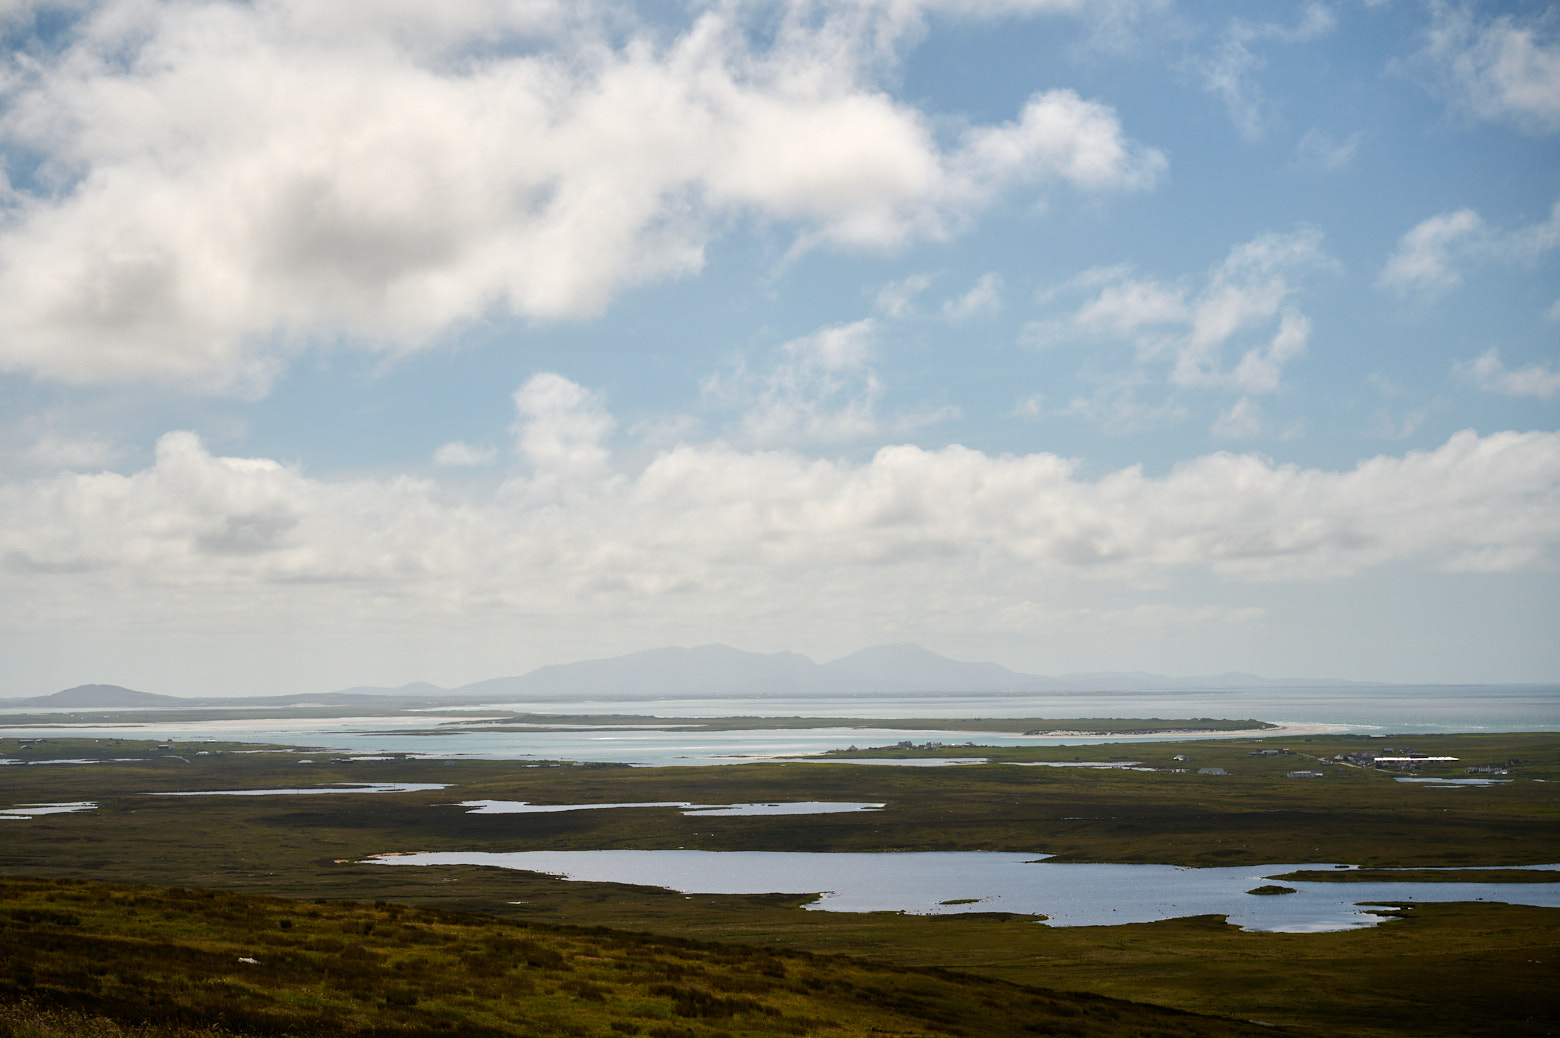 Looking out from North Uist towards St Kilda, Outer Hebrides